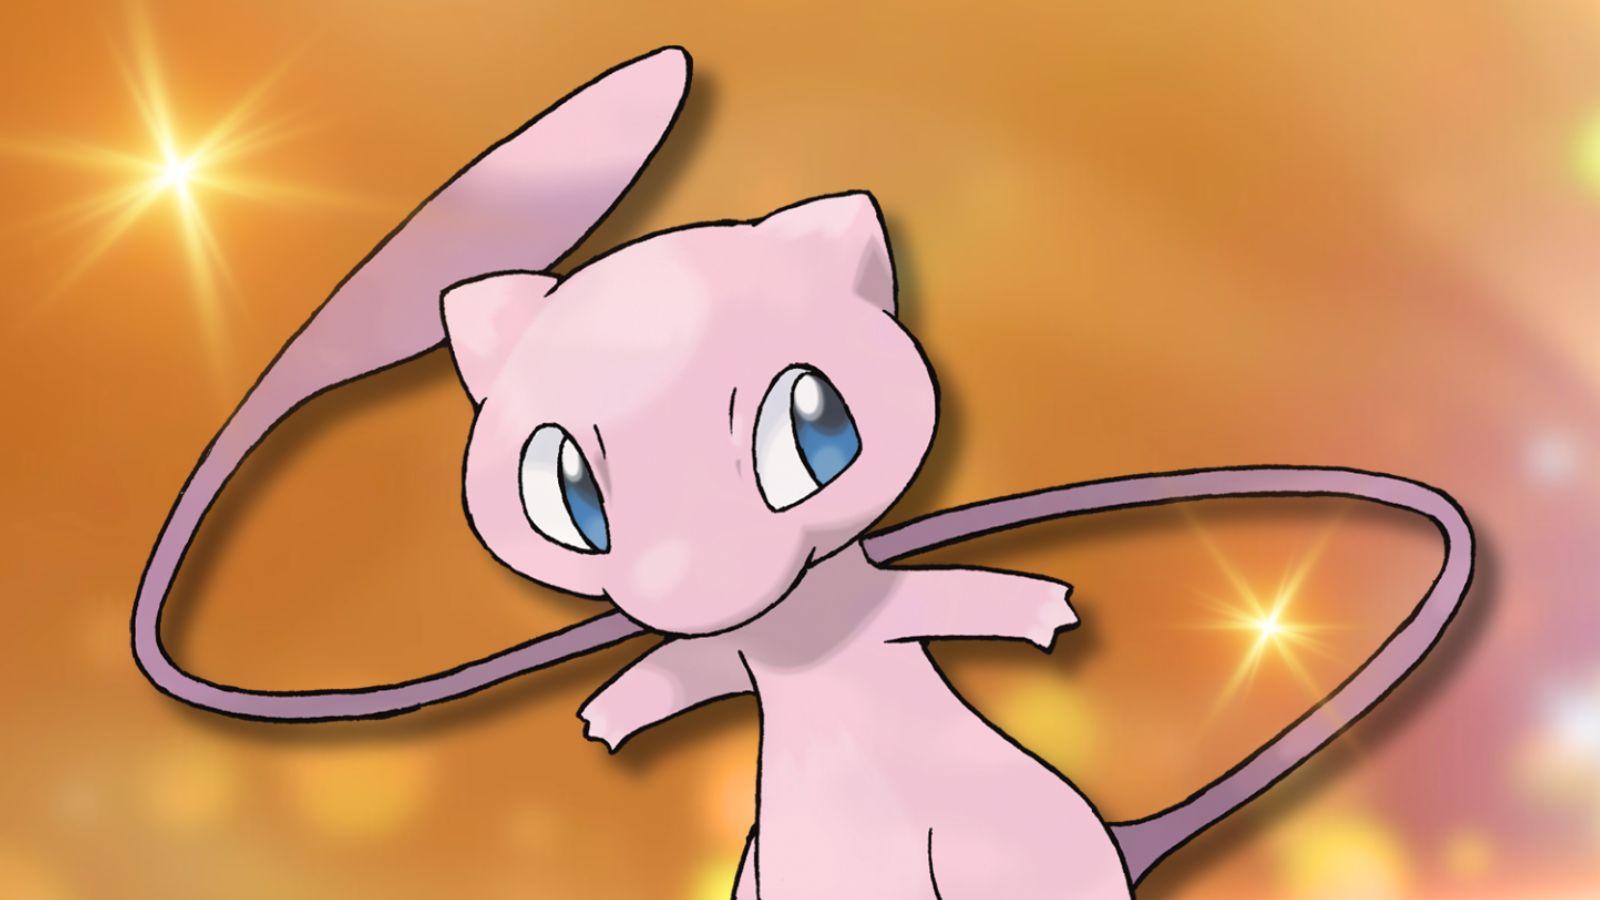 Mew Pokemon with sparkly gold background.